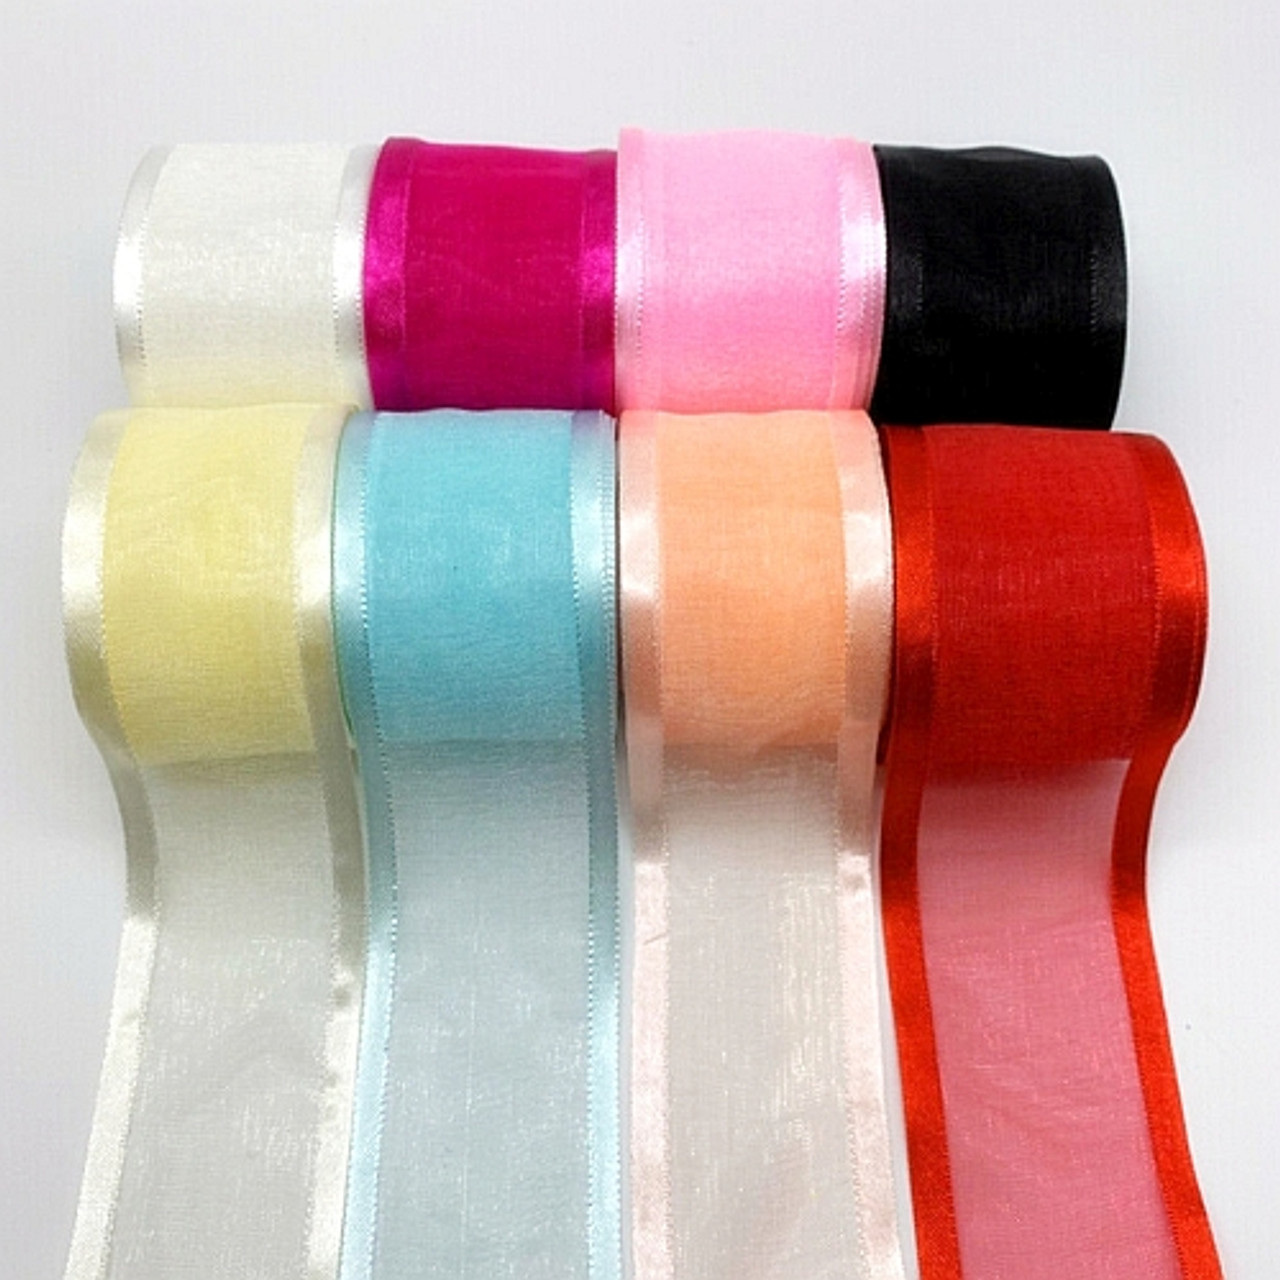 Star in Circle Satin Ribbon for Bows Gift Wrapping DIY Craft Projects - 1  - 3 Yards